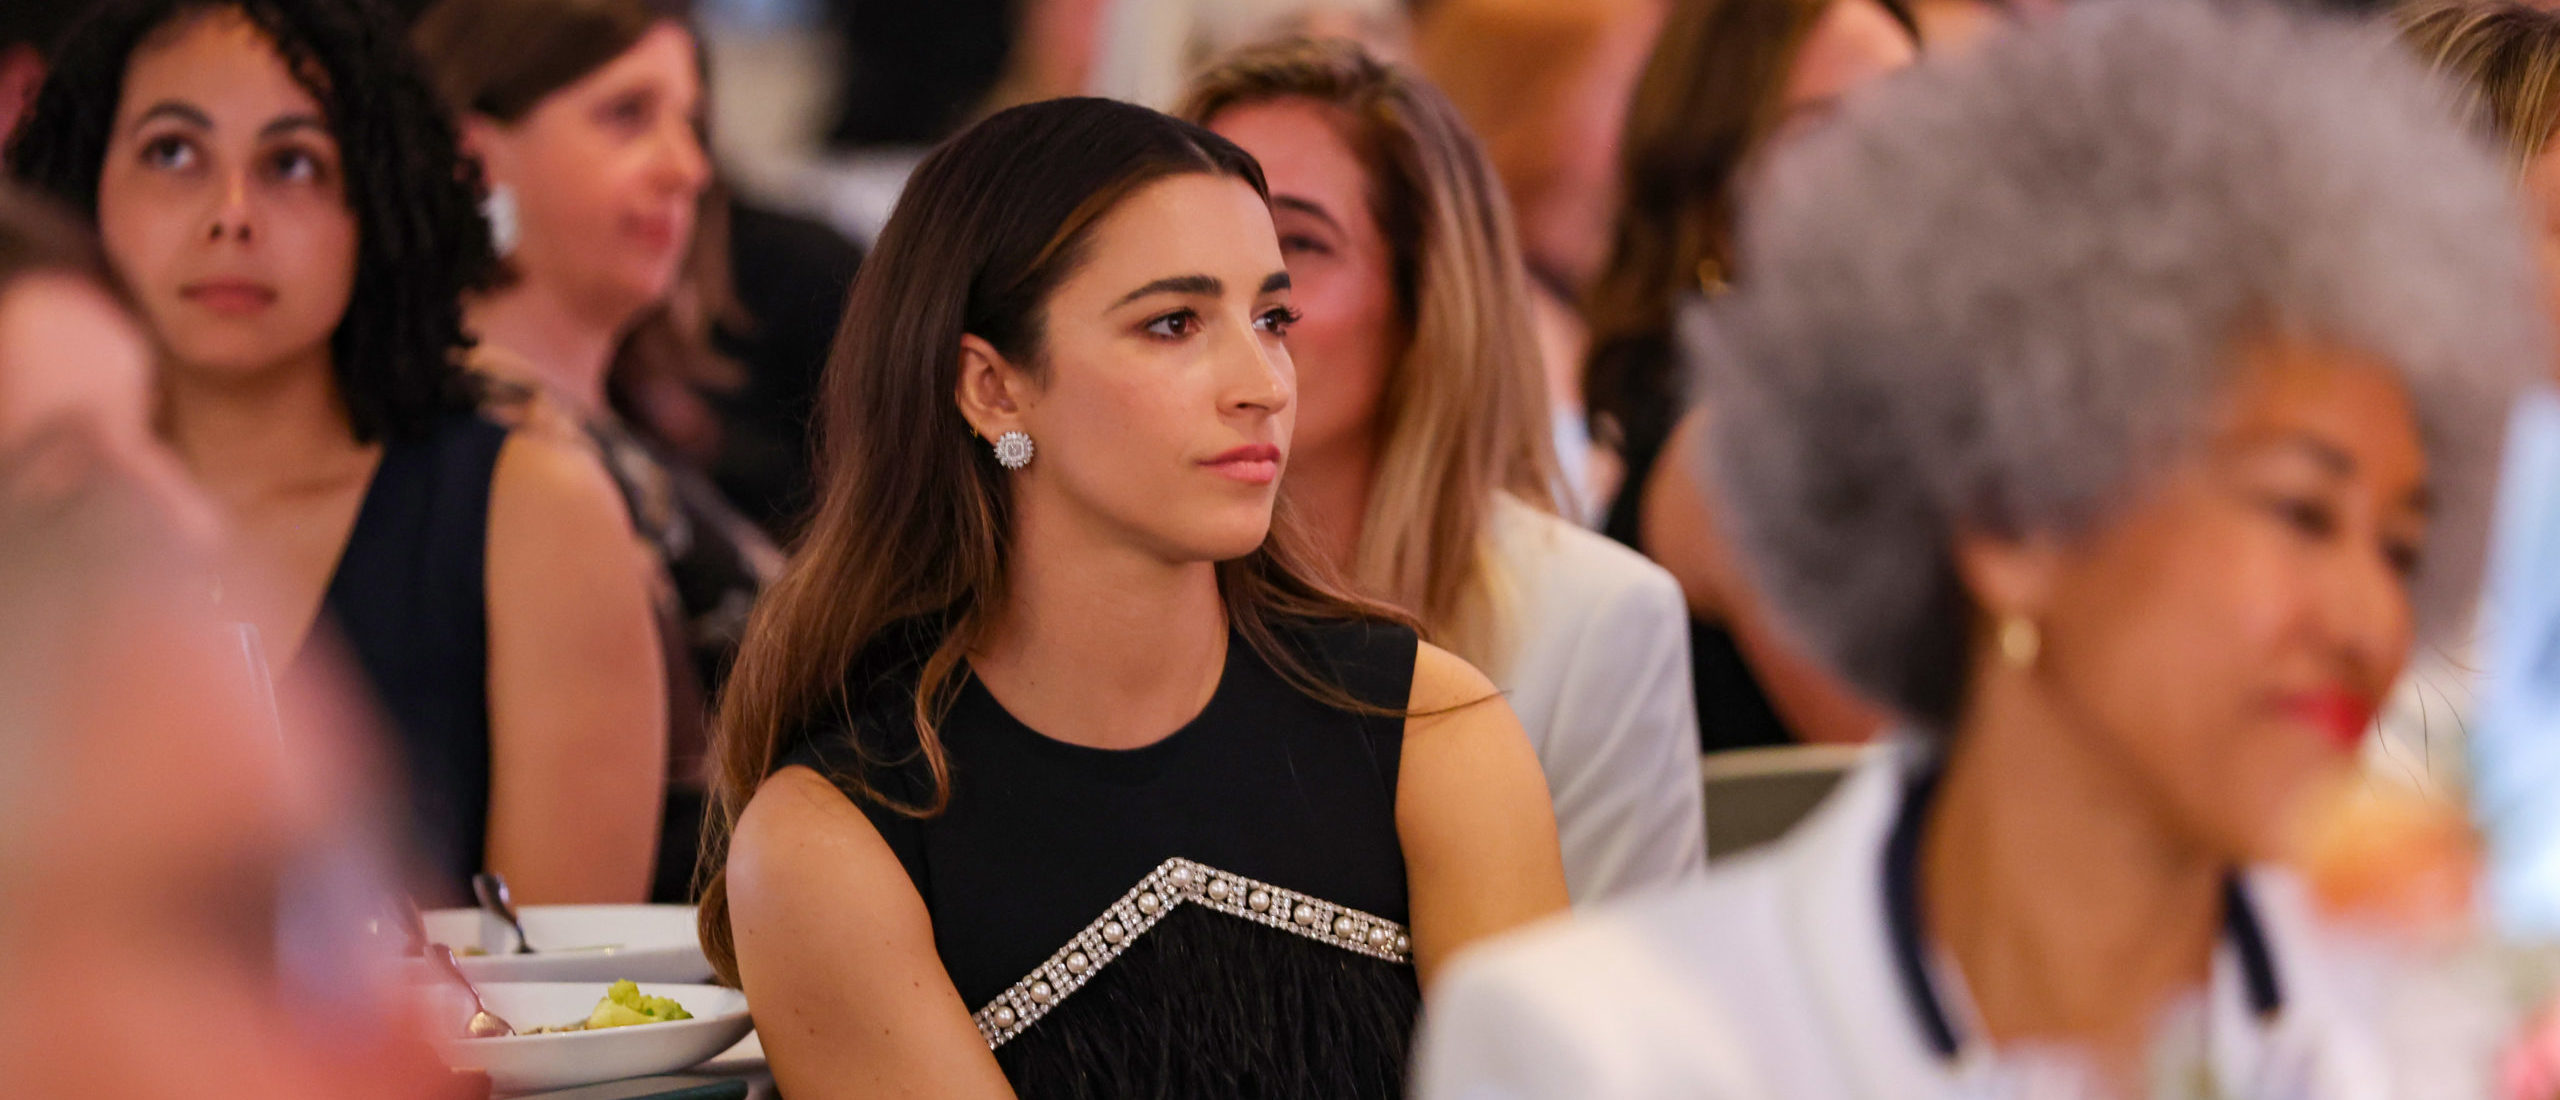 Remember Aly Raisman? Here’s What The Star Olympian’s Been Up To | The ...